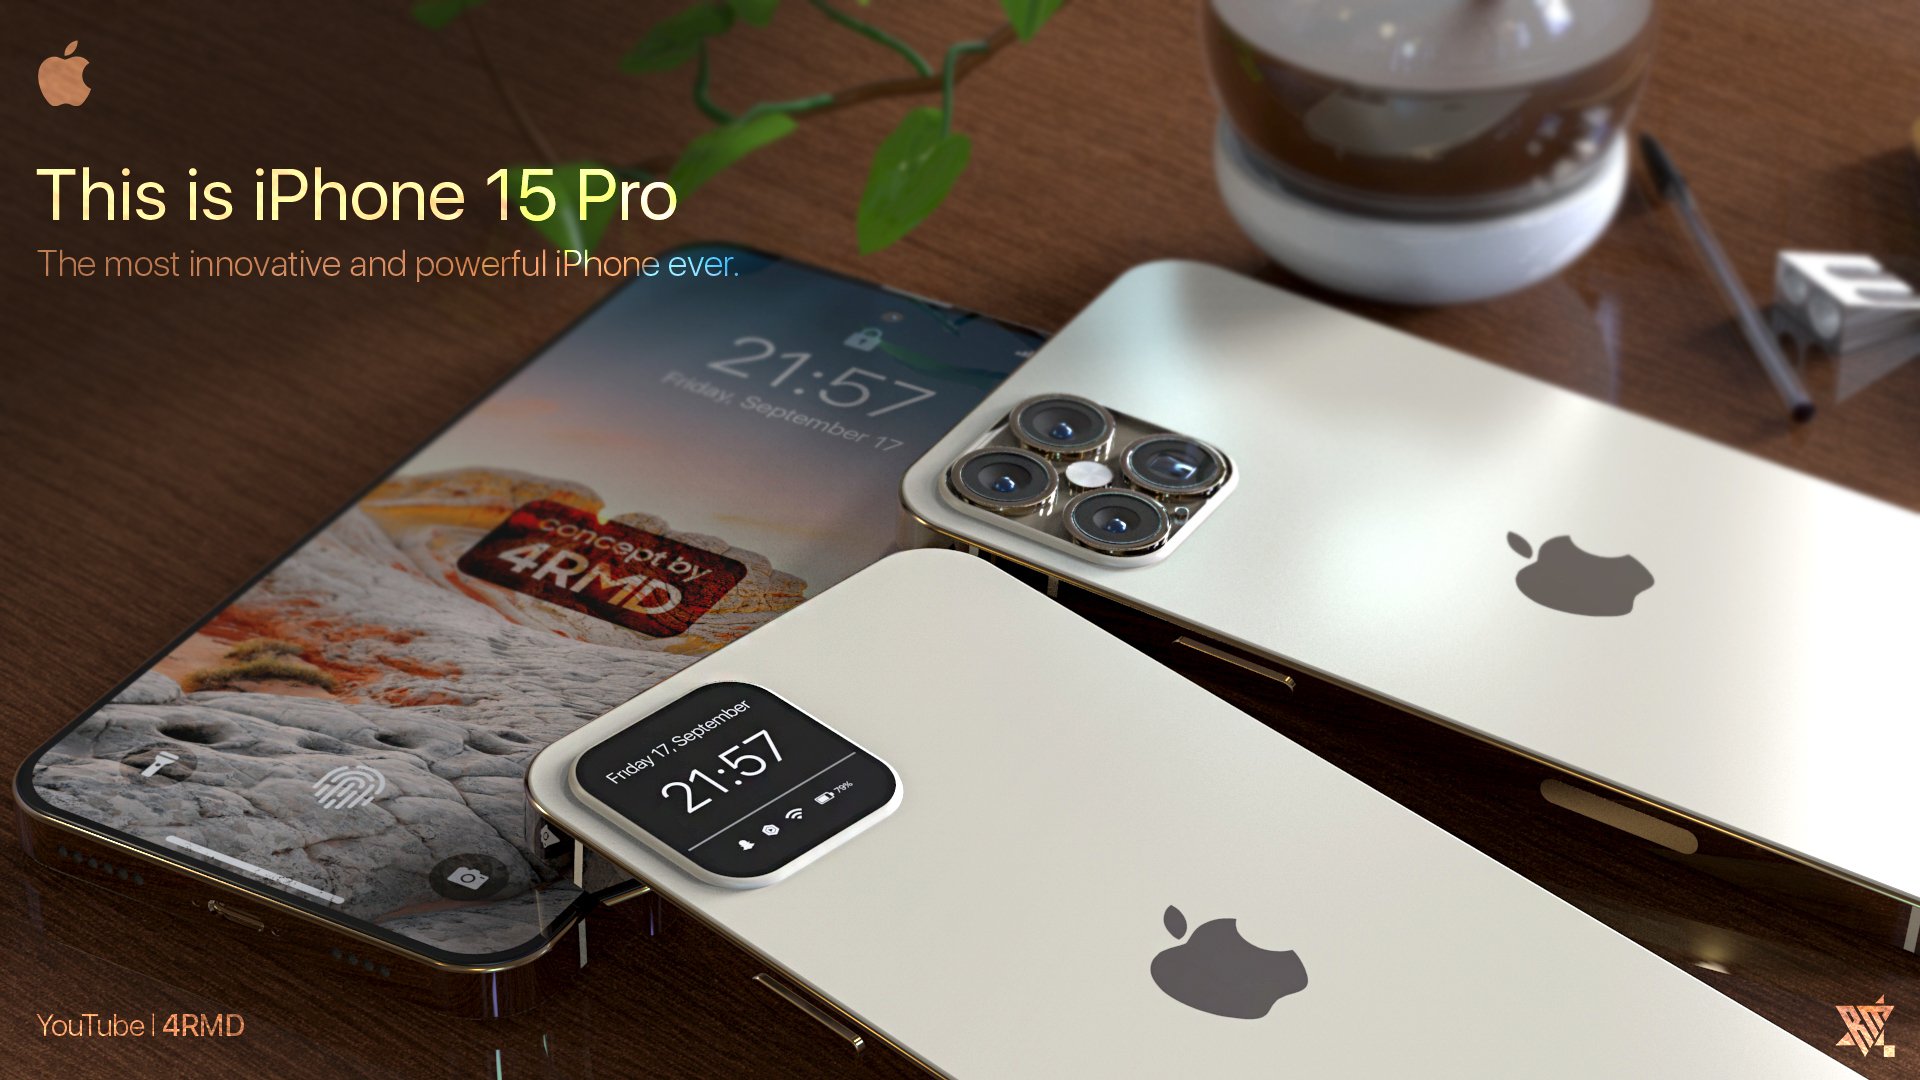 This iPhone 15 Pro concept is utterly bonkers and insanely great